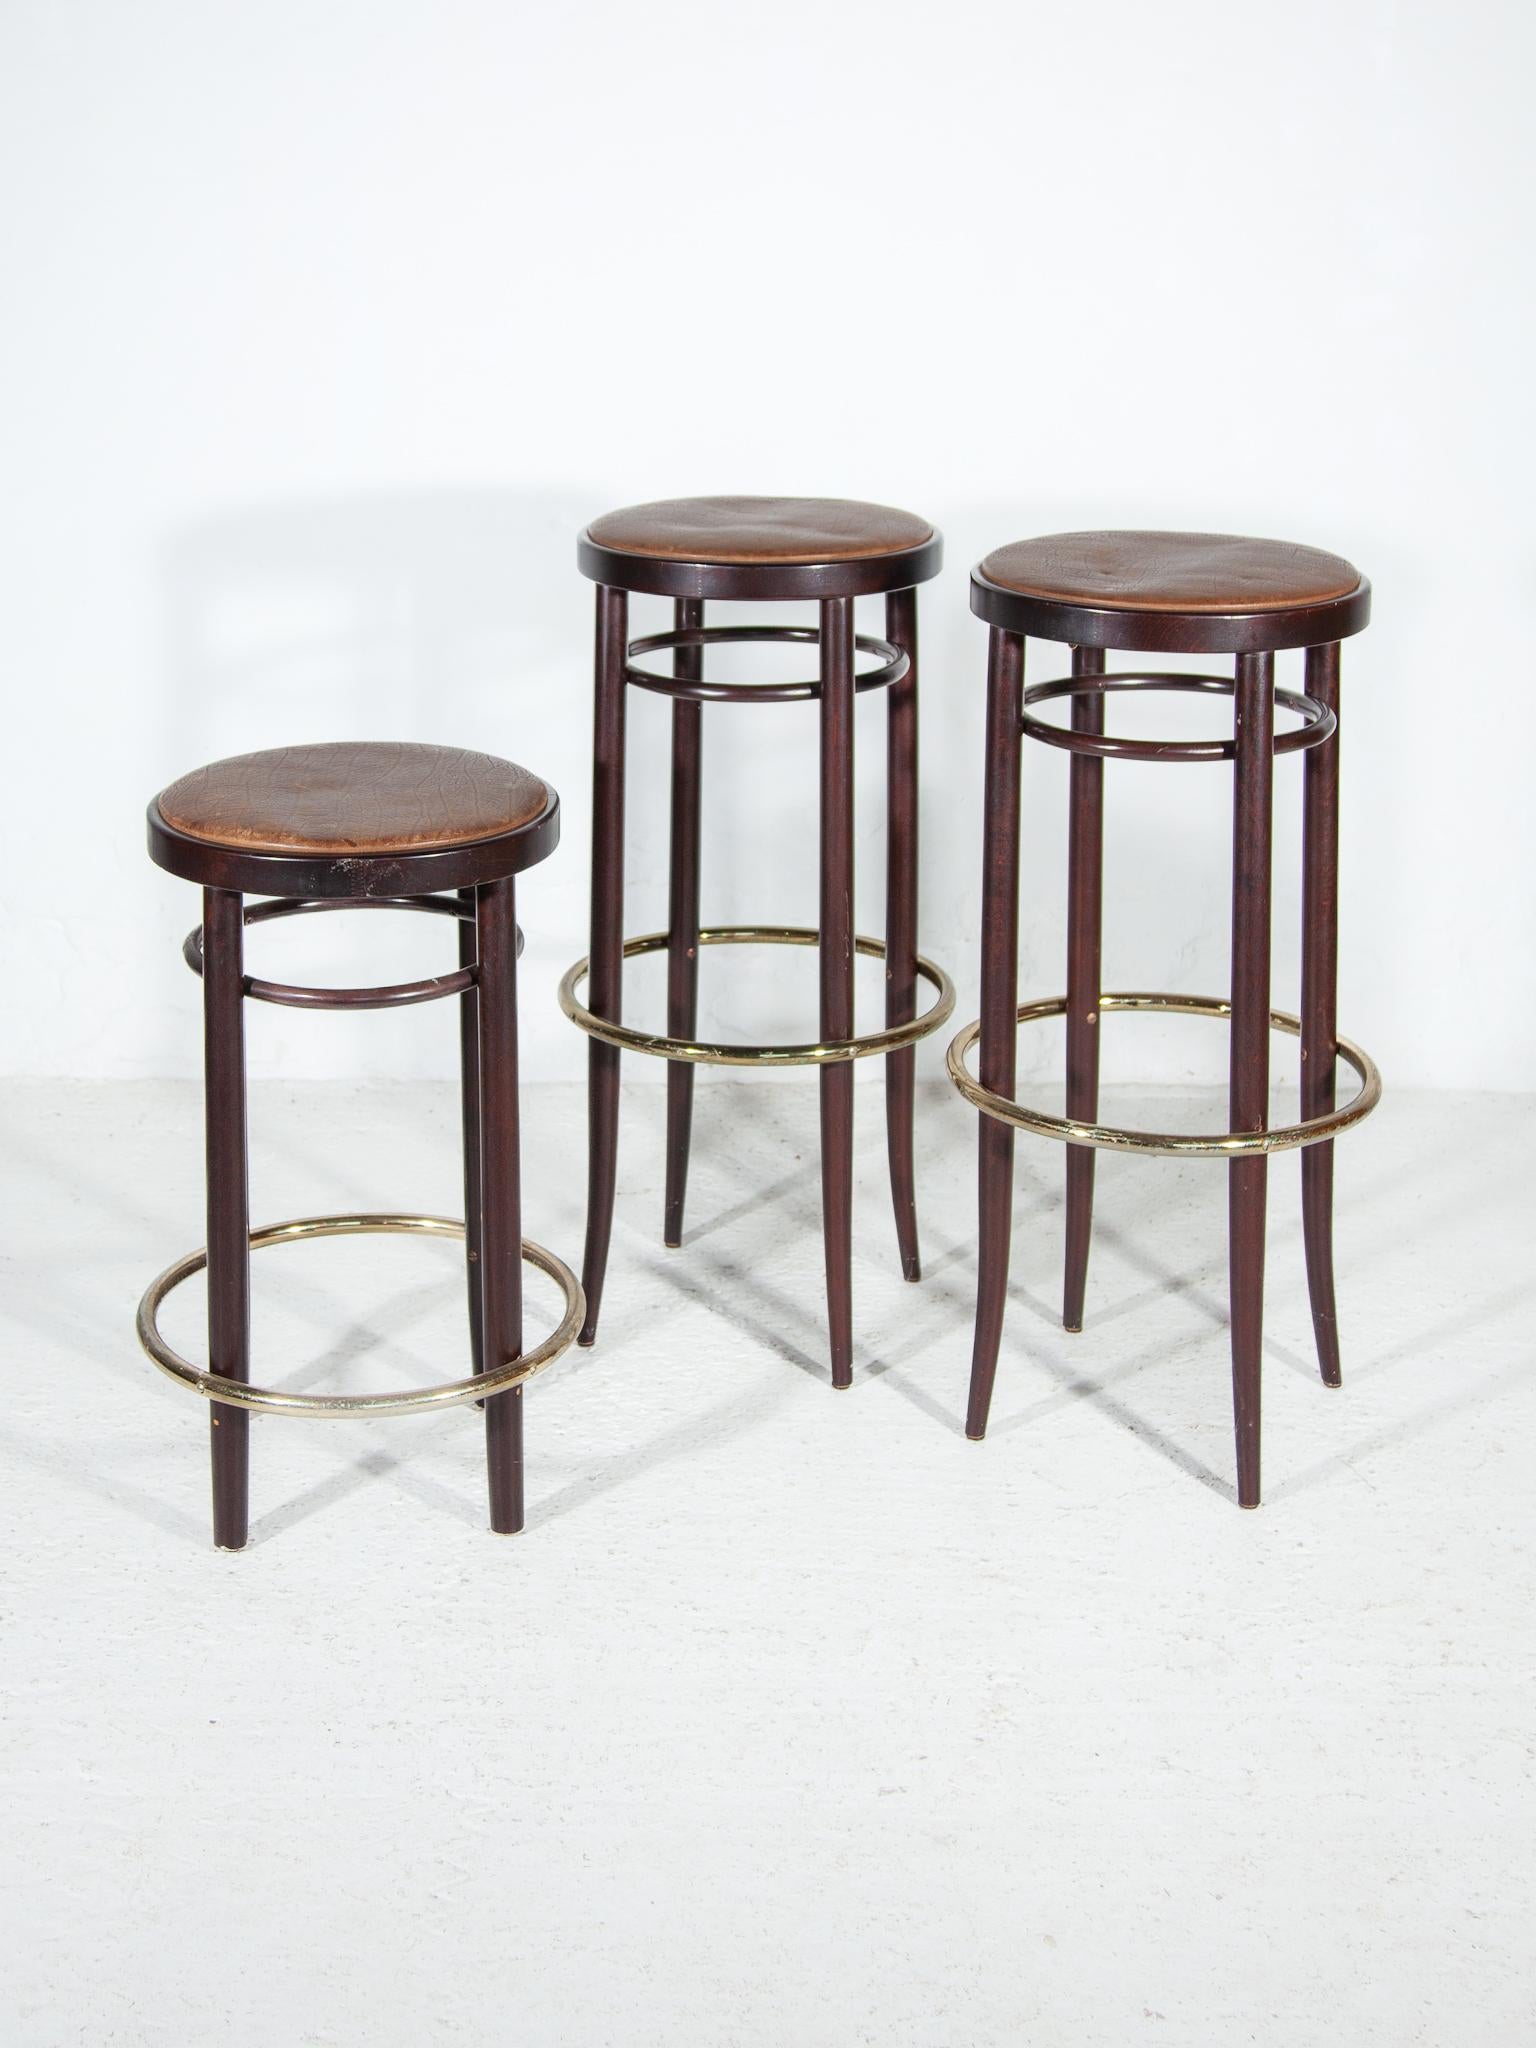 Thonet Bar Stools, 1970s set of Two, Austria For Sale 5